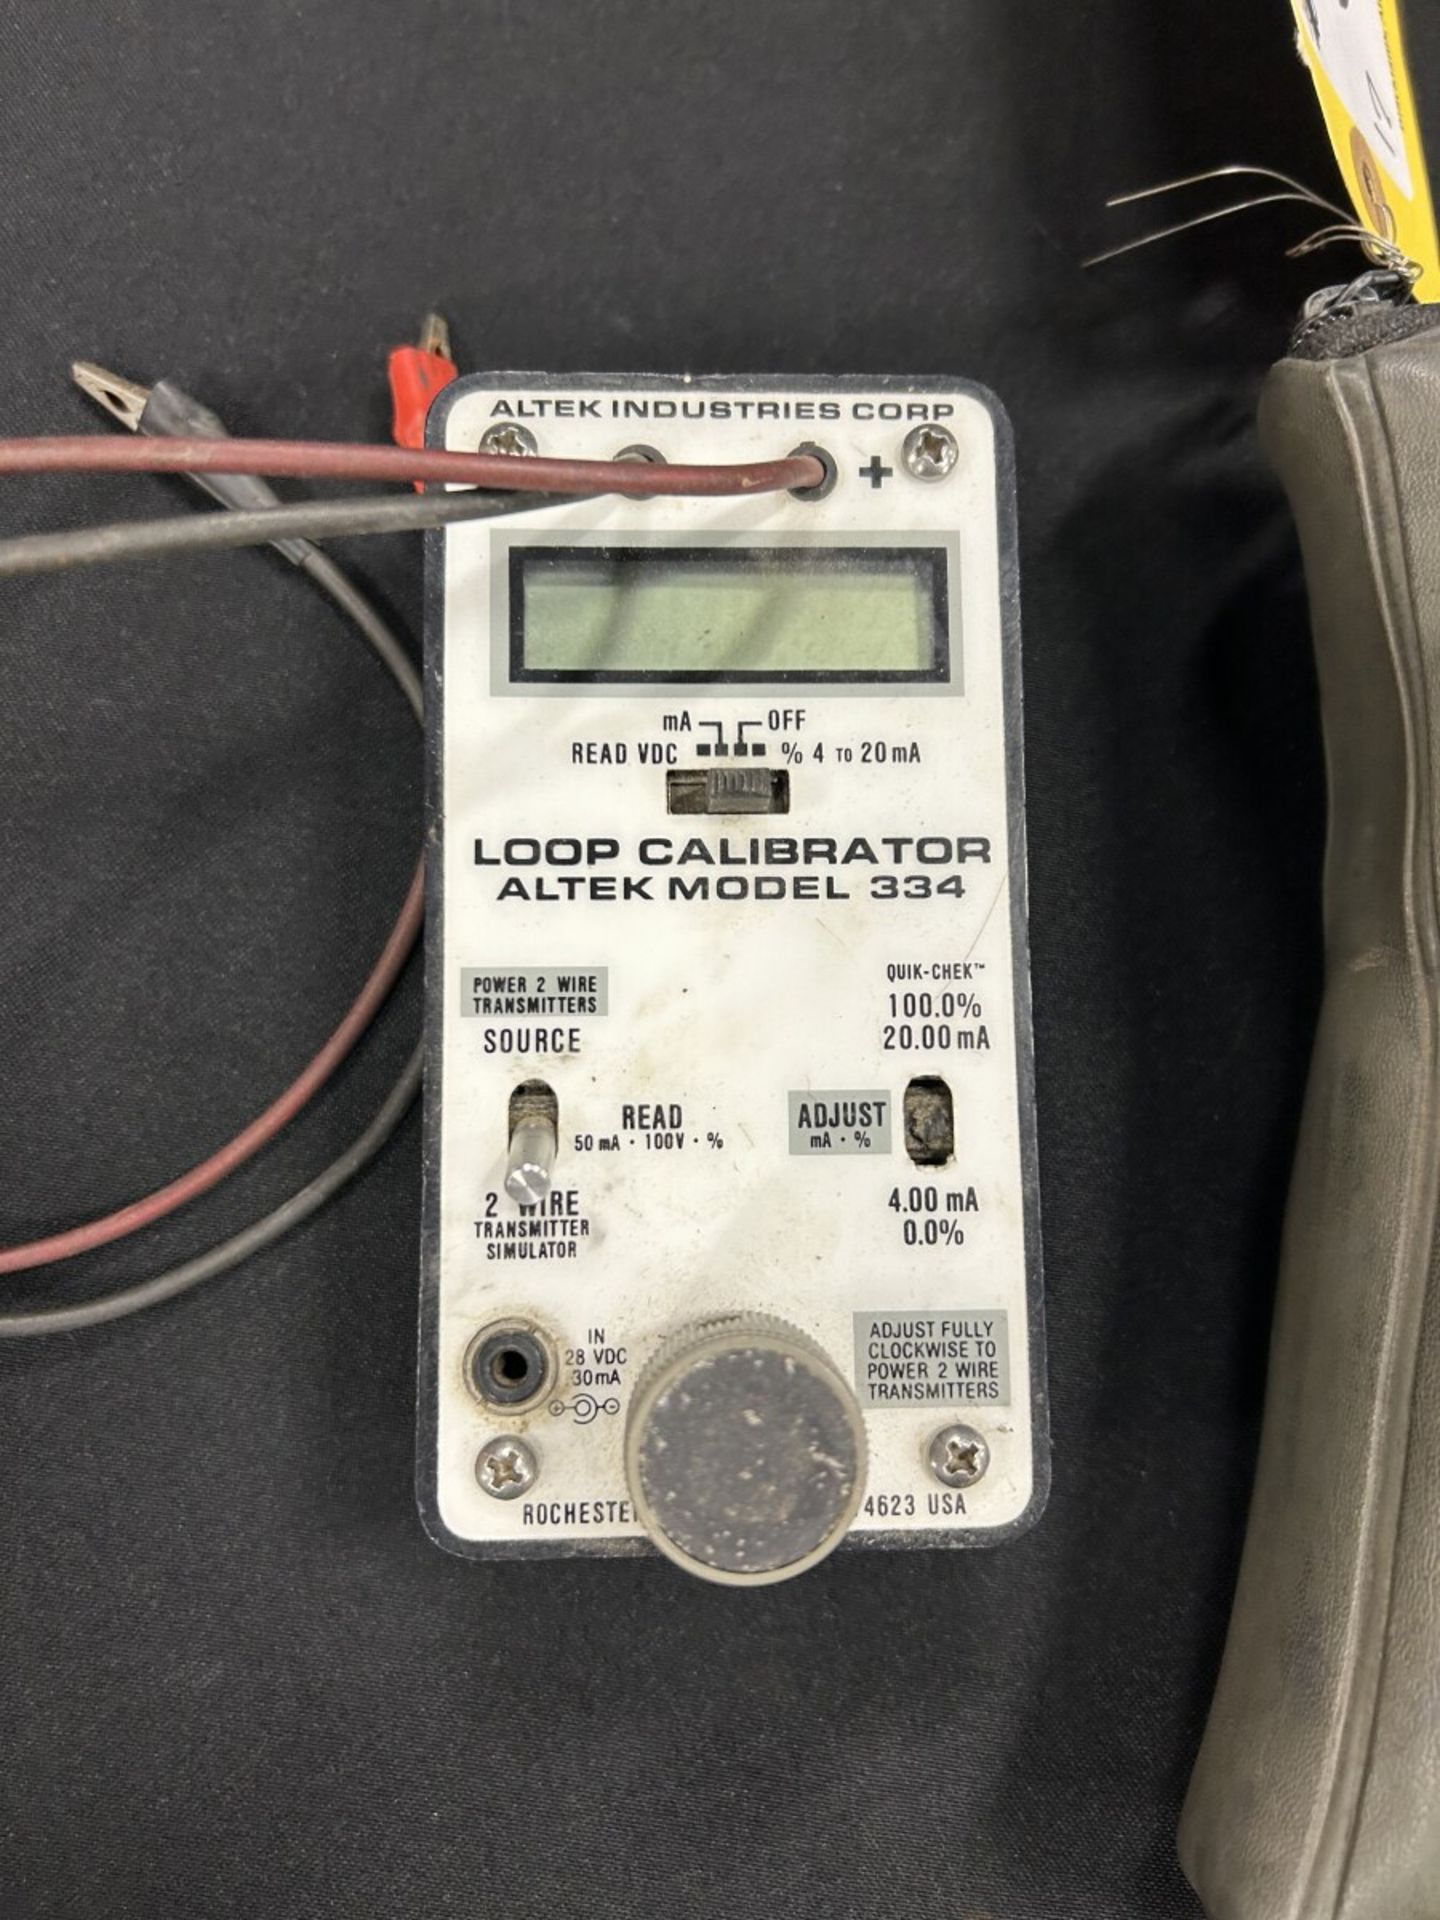 ALTK INDUSTRIES LOOP CALIBRATER MODEL: 334 W/ ASSORTED FLUKE CONNECTION WIRES - Image 2 of 5